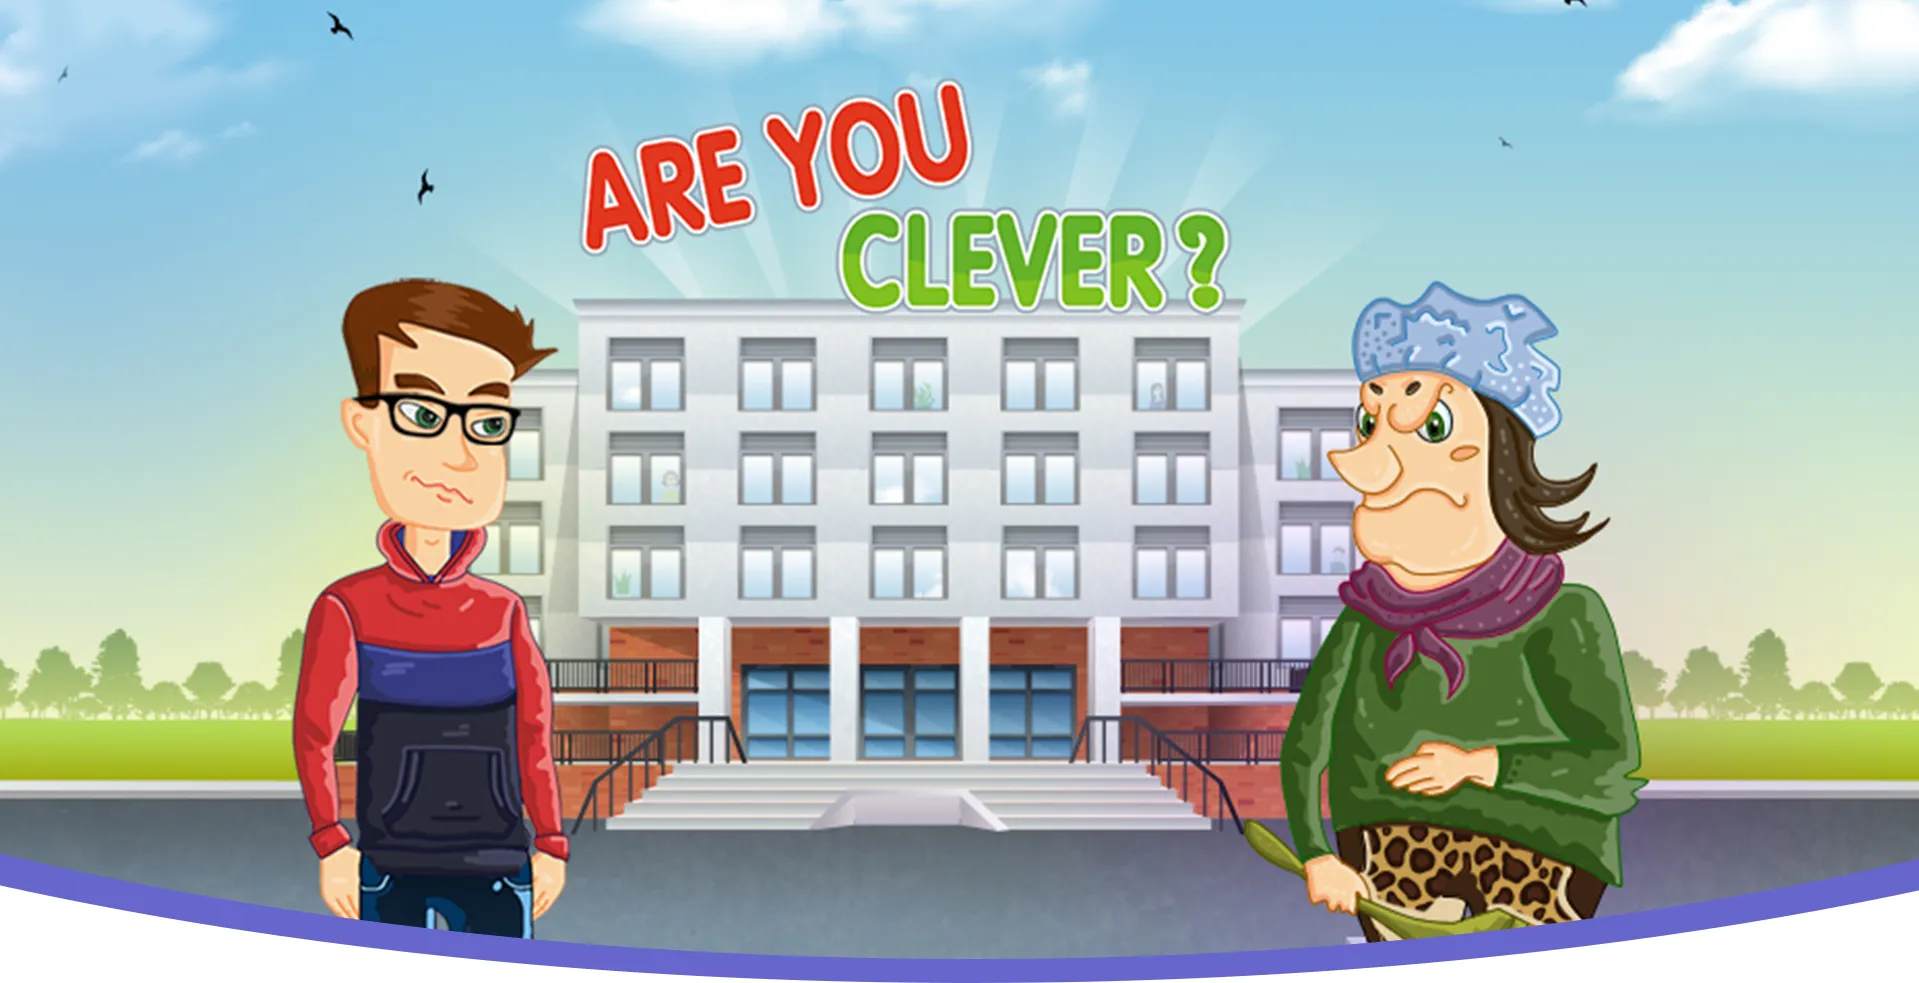 Are you clever?